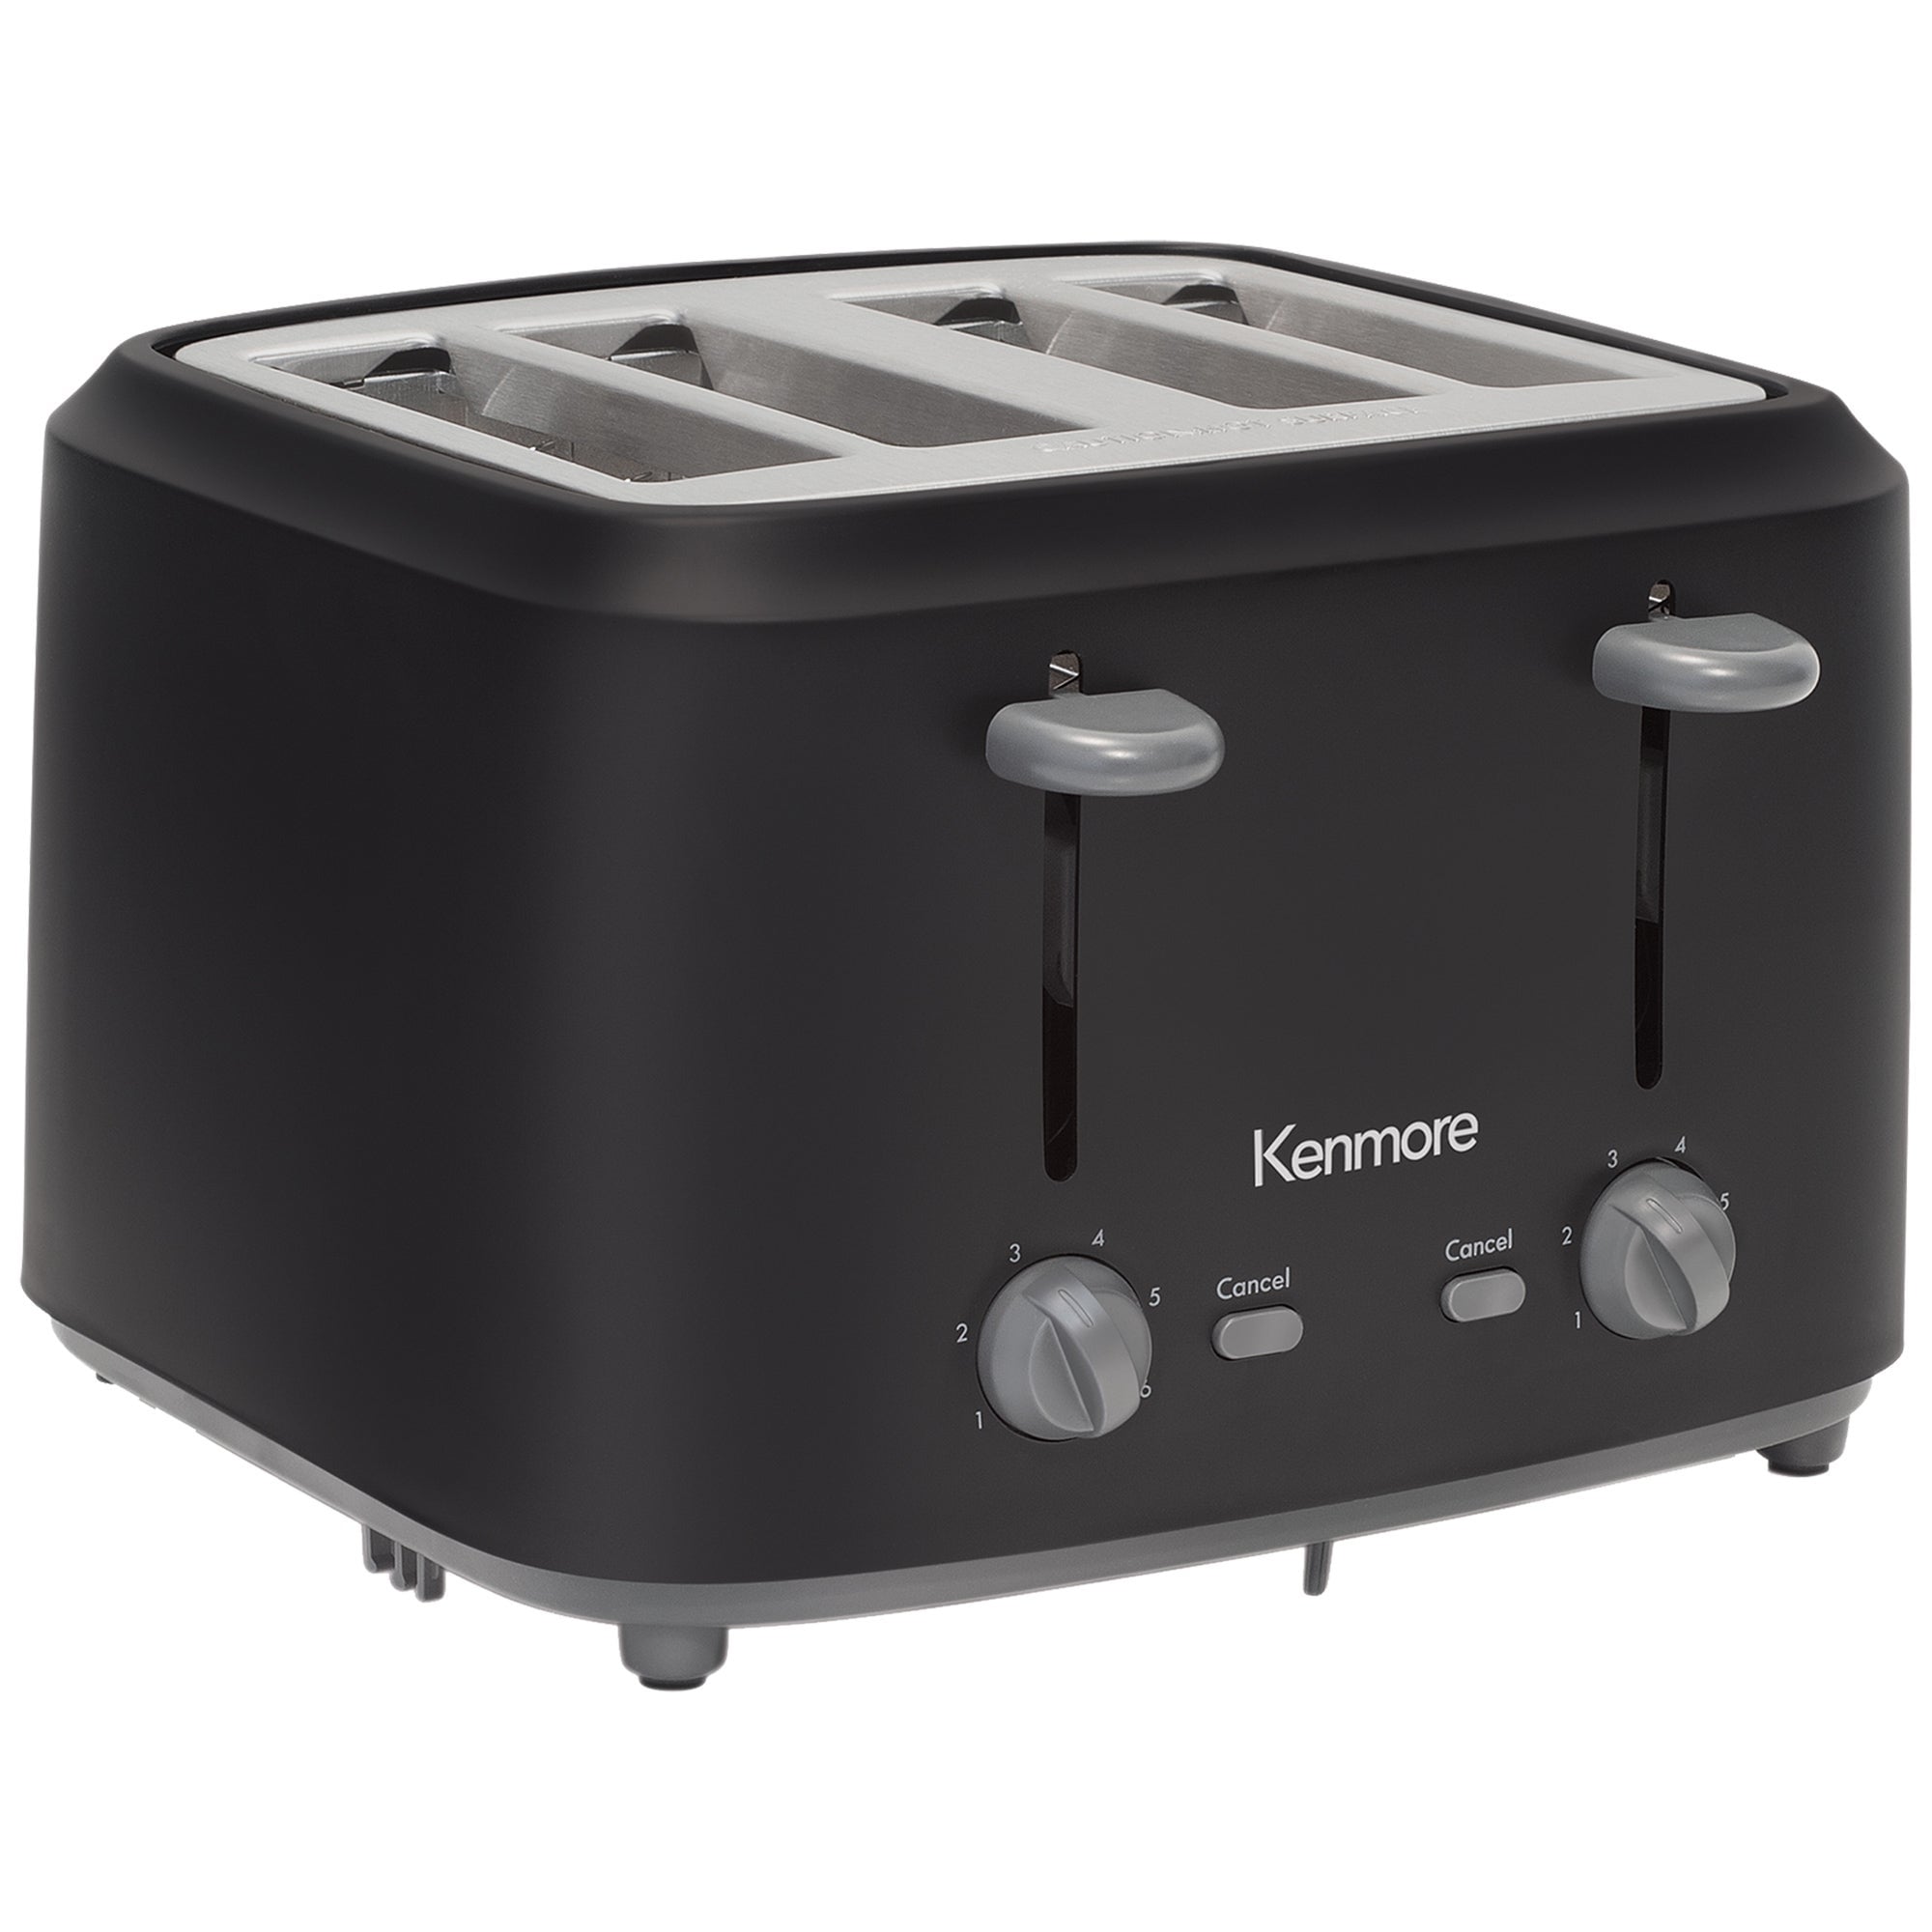 https://ak1.ostkcdn.com/images/products/is/images/direct/c688196f6a67fae6ee2a6bb515664c45e1af096a/Kenmore-4-Slice-Toaster-with-Dual-Controls%2C-Matte-Black-and-Gray%2C-Wide-Slots%2C-Adjustable-Browning.jpg